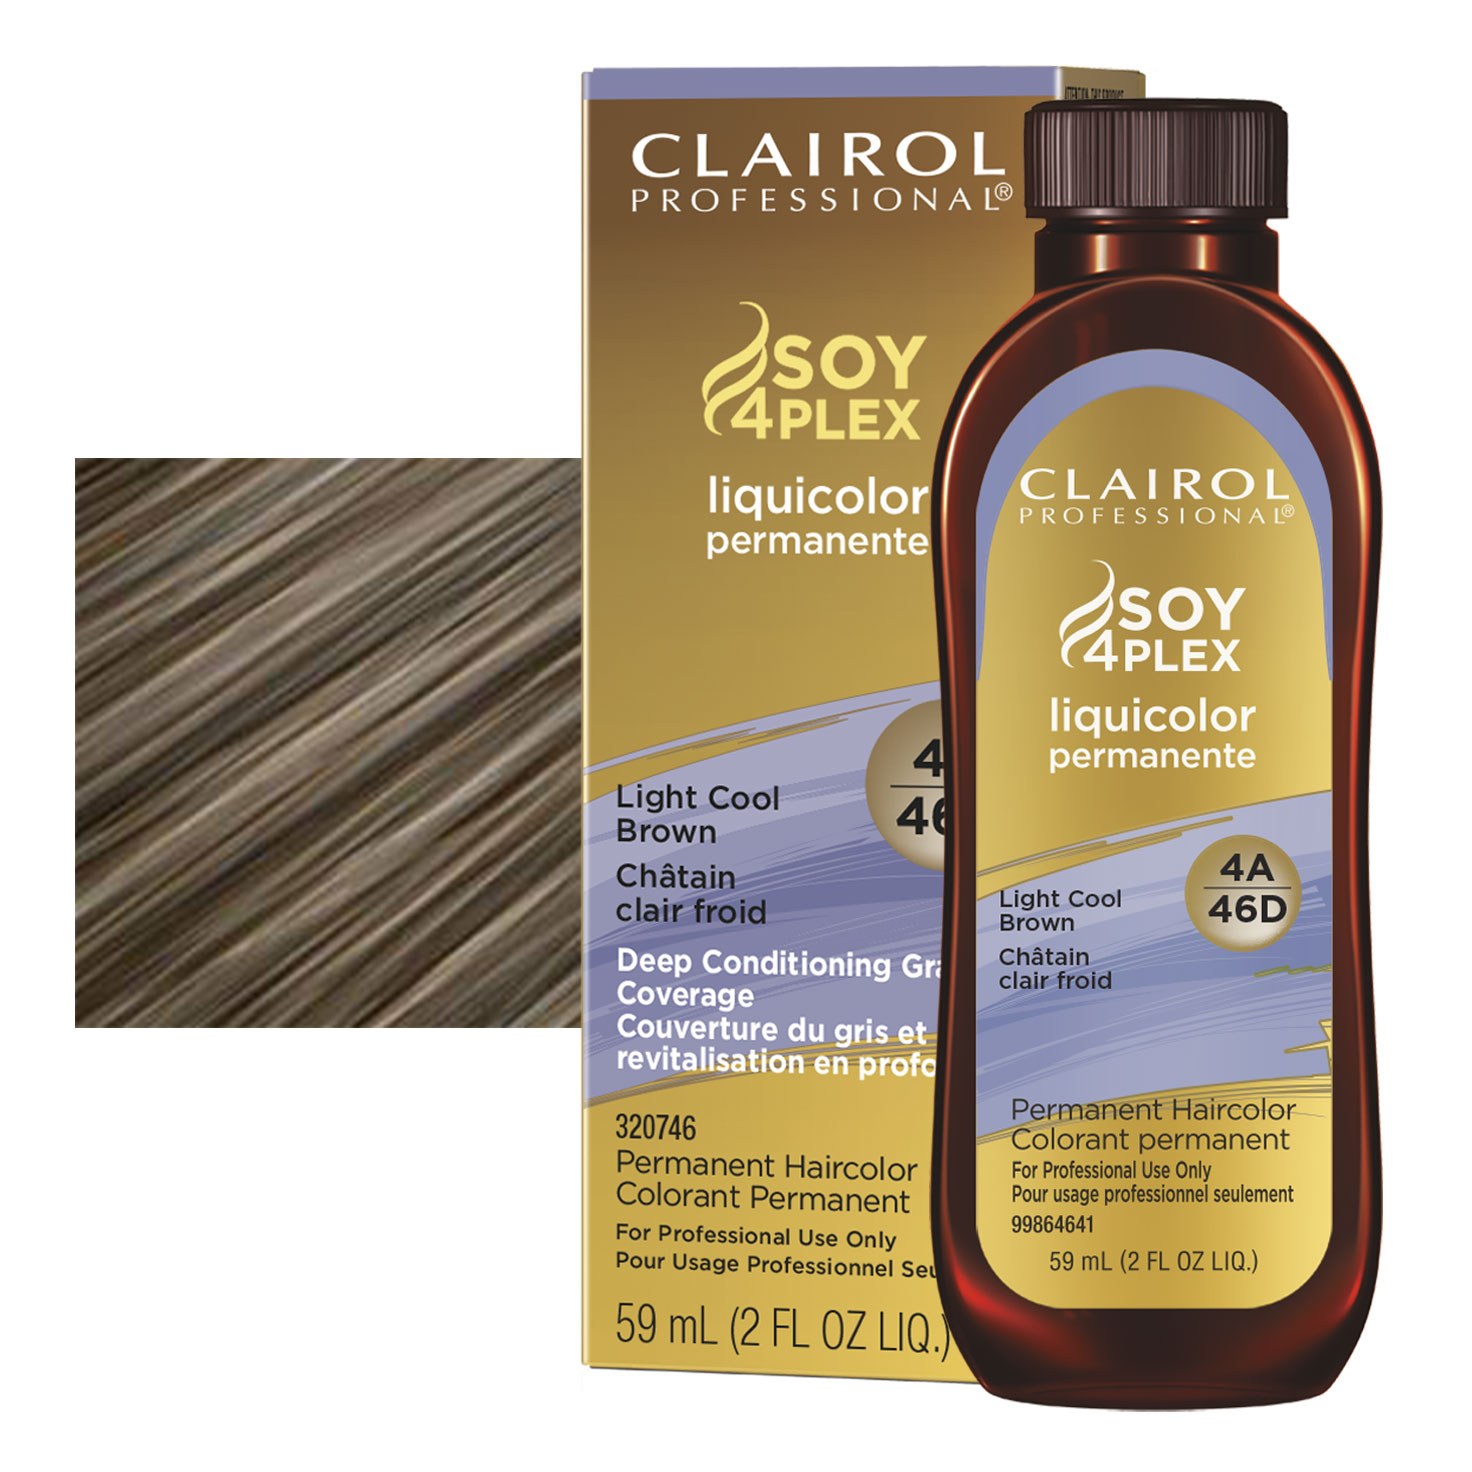 Clairol Products, Clairol Distributor S4P Light Cool Brown 4A/46D - 2 oz